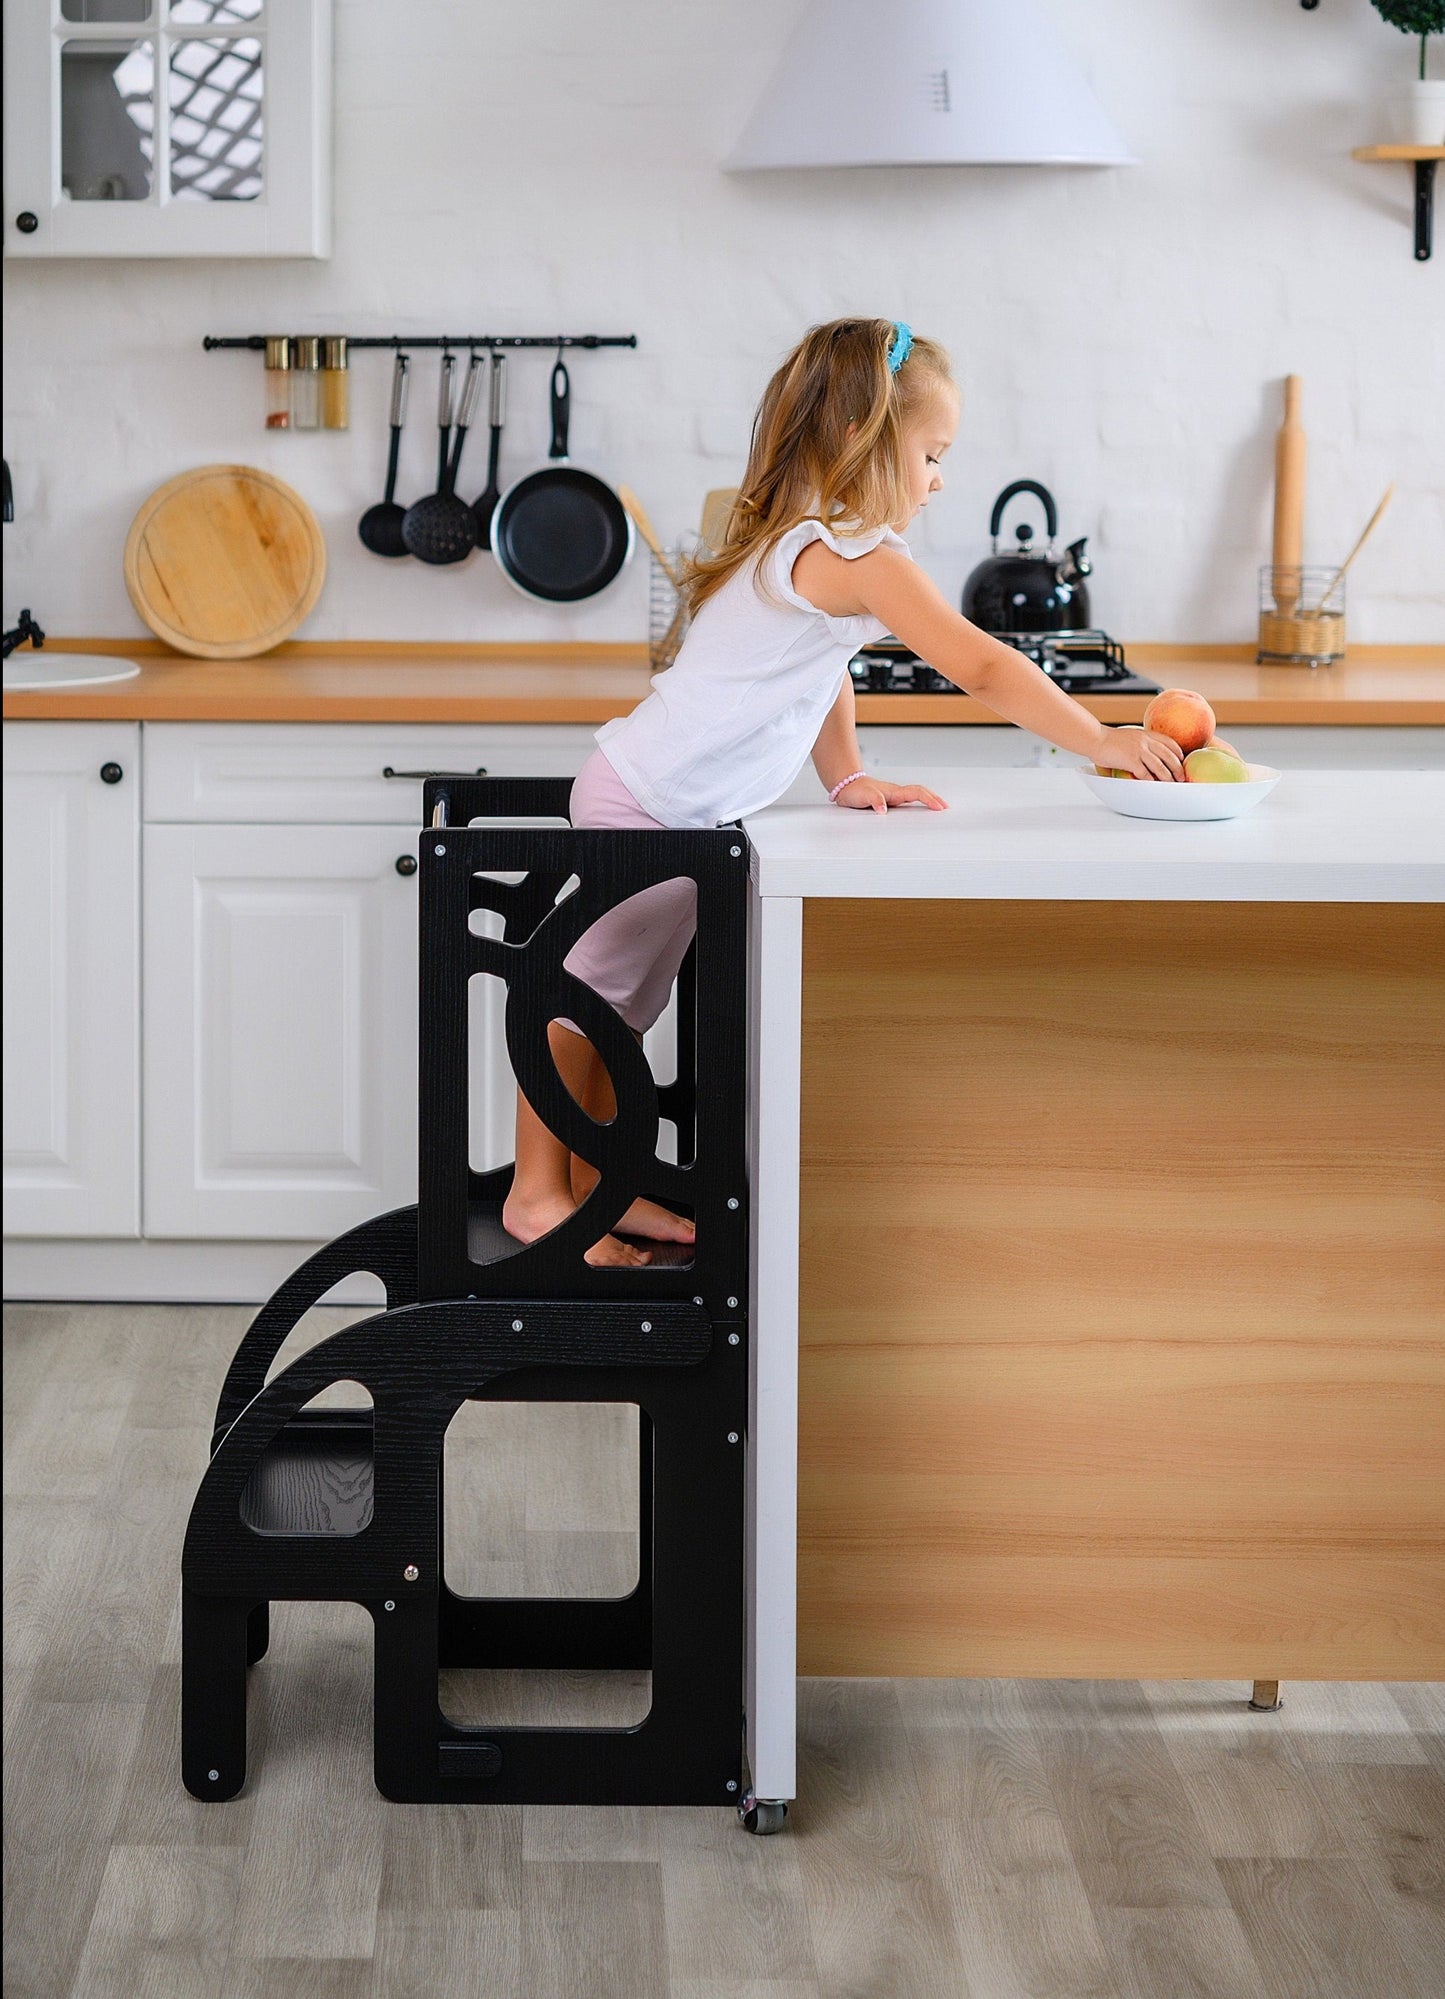 BLACK Learning Convertible tower & table kitchen step stool 2in1 Learning Helper Tower montessori toddler tower kitchen step stool lernturm